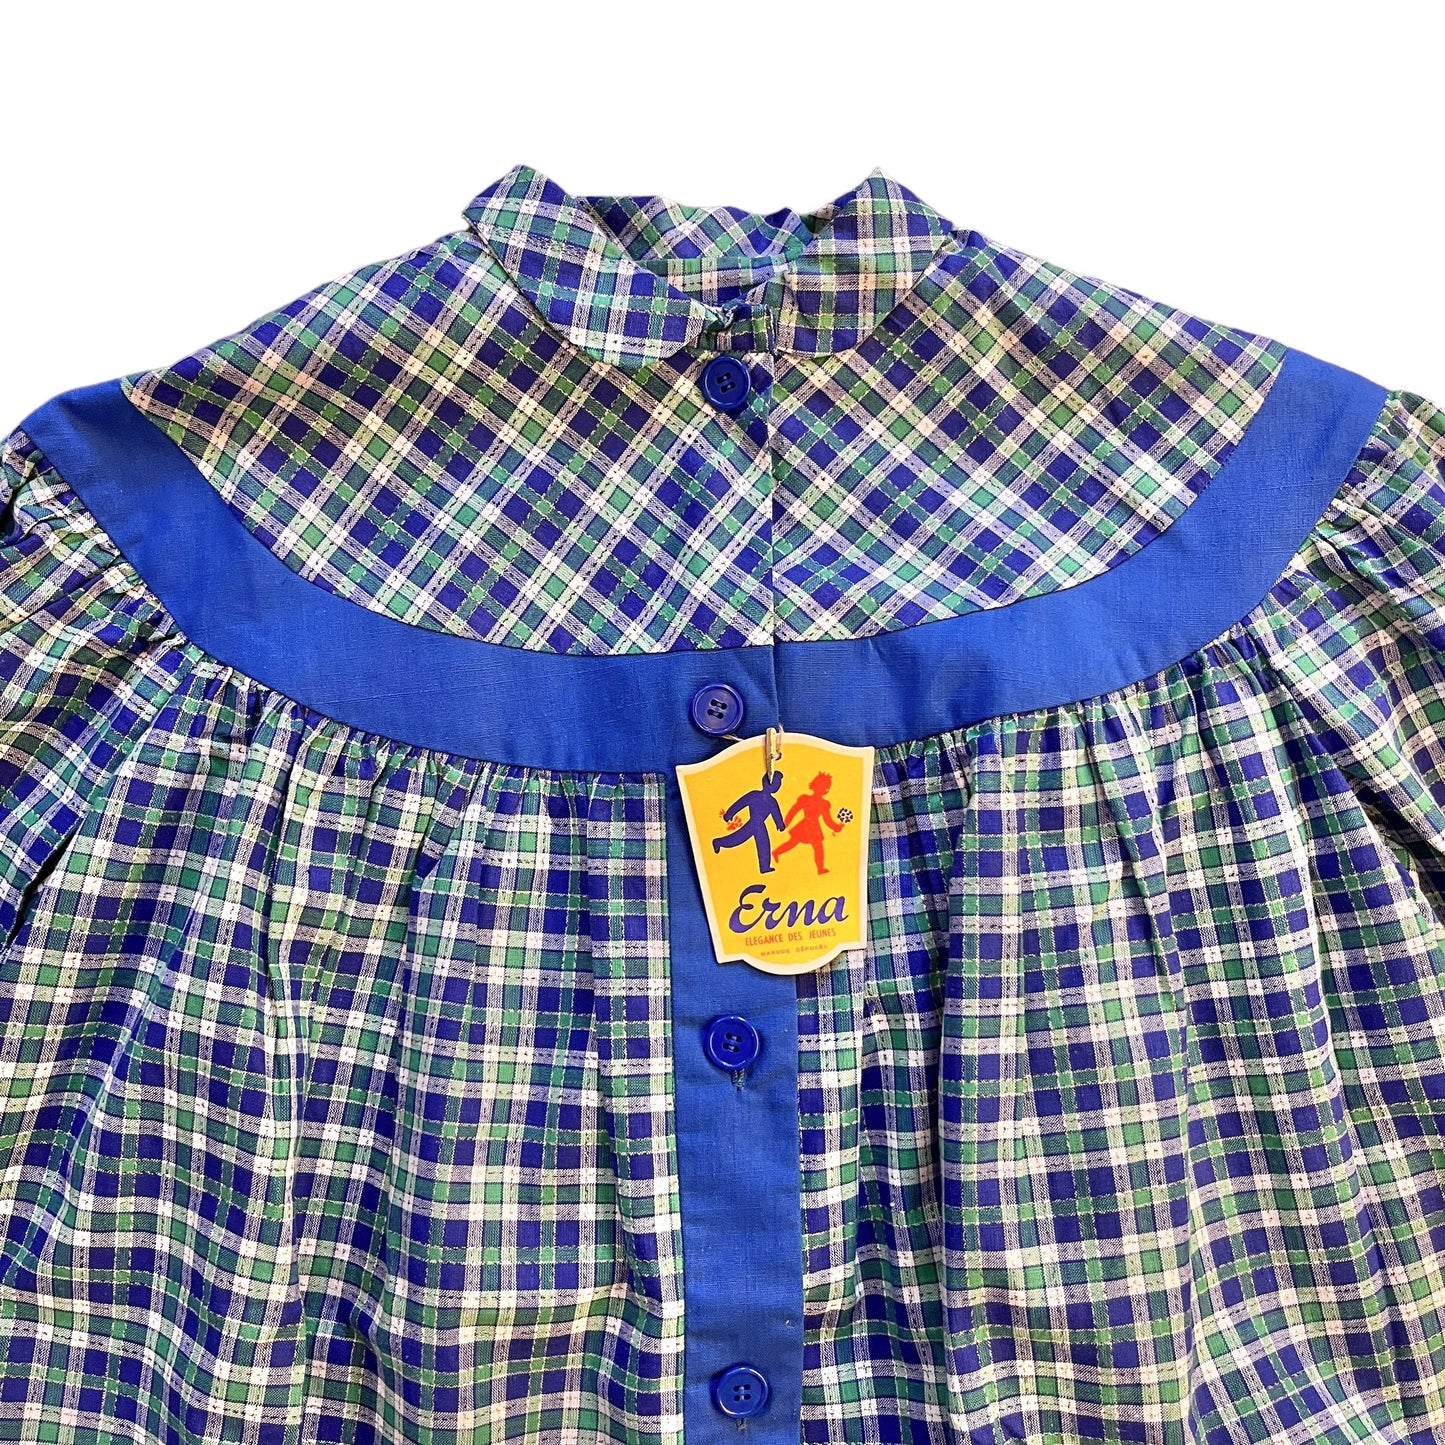 Vintage 1960s Checkered Blue Tunic / 10-12 Years